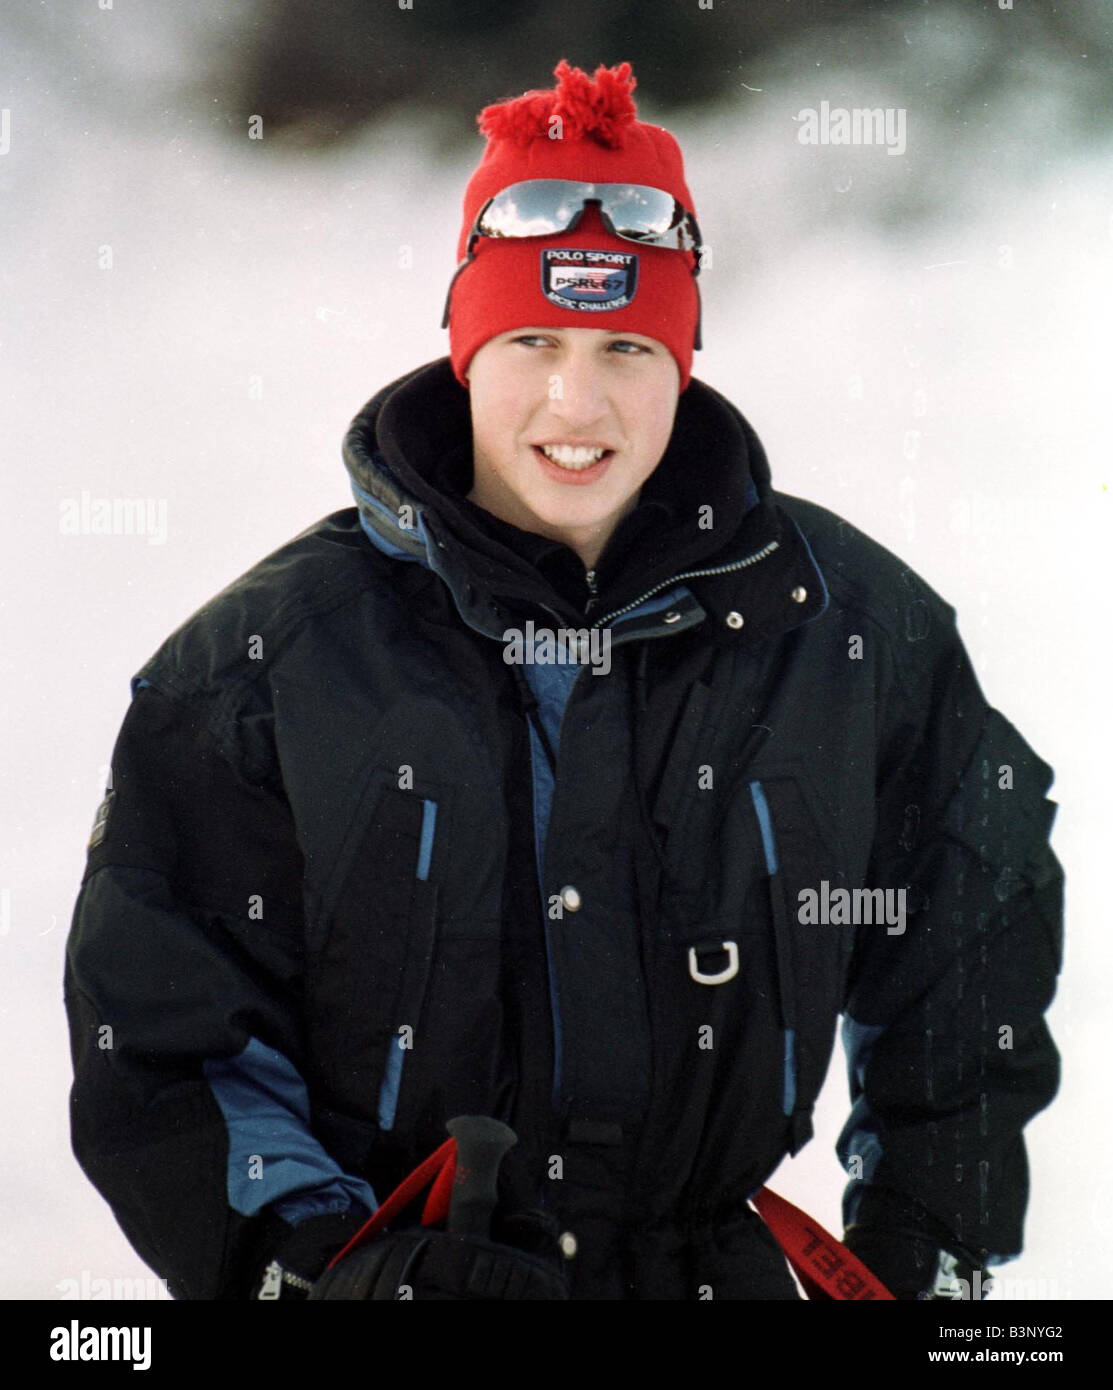 Prince William Collection 1998 Prince William on holiday in Klosters  January 1998 with Prince Charles Prince Harry and the daughter Princess  Royal Zara Phillips poses on the ski slopes of Klosters during